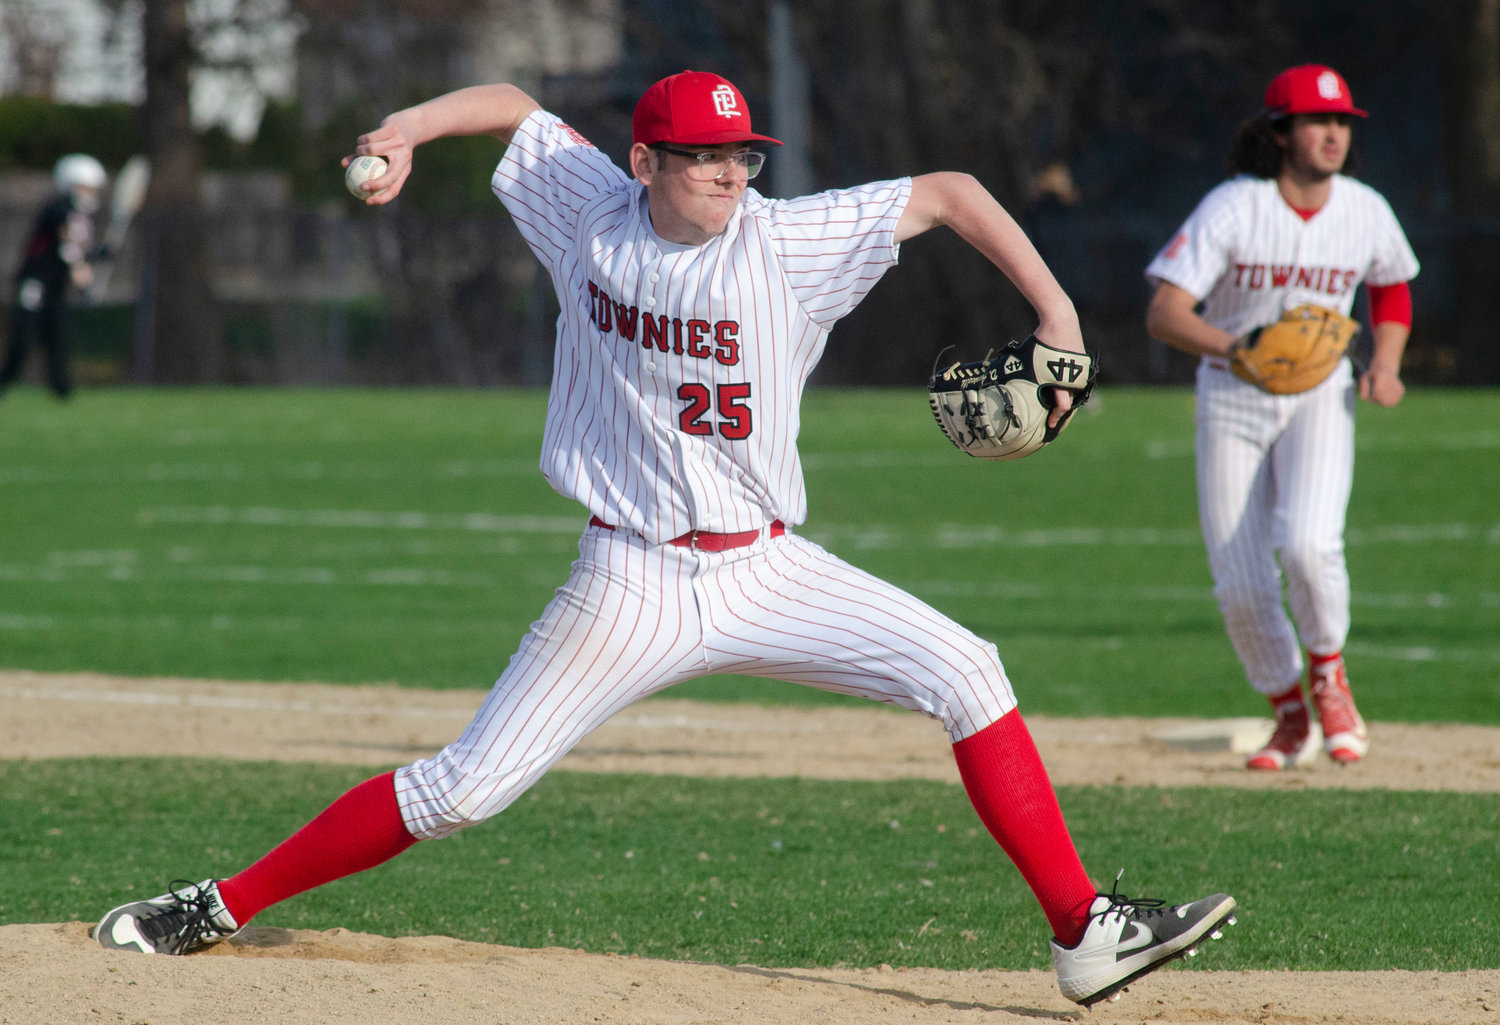 Pitcher Dylan Annicelli rears back to make a pitch during the Townies game at Barrington on Wednesday.